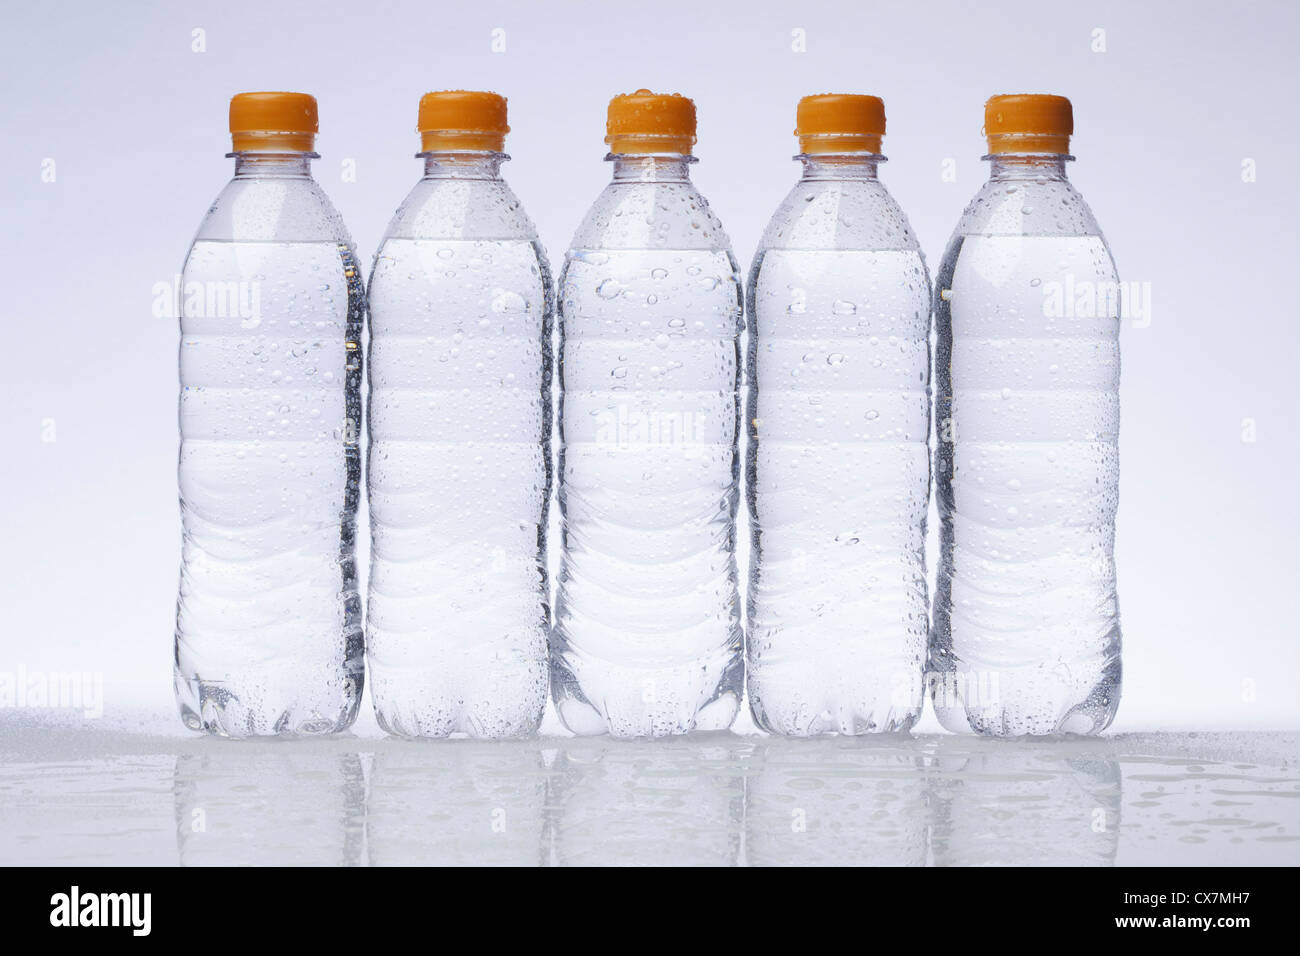 A row of five full plastic water bottles in a row Stock Photo